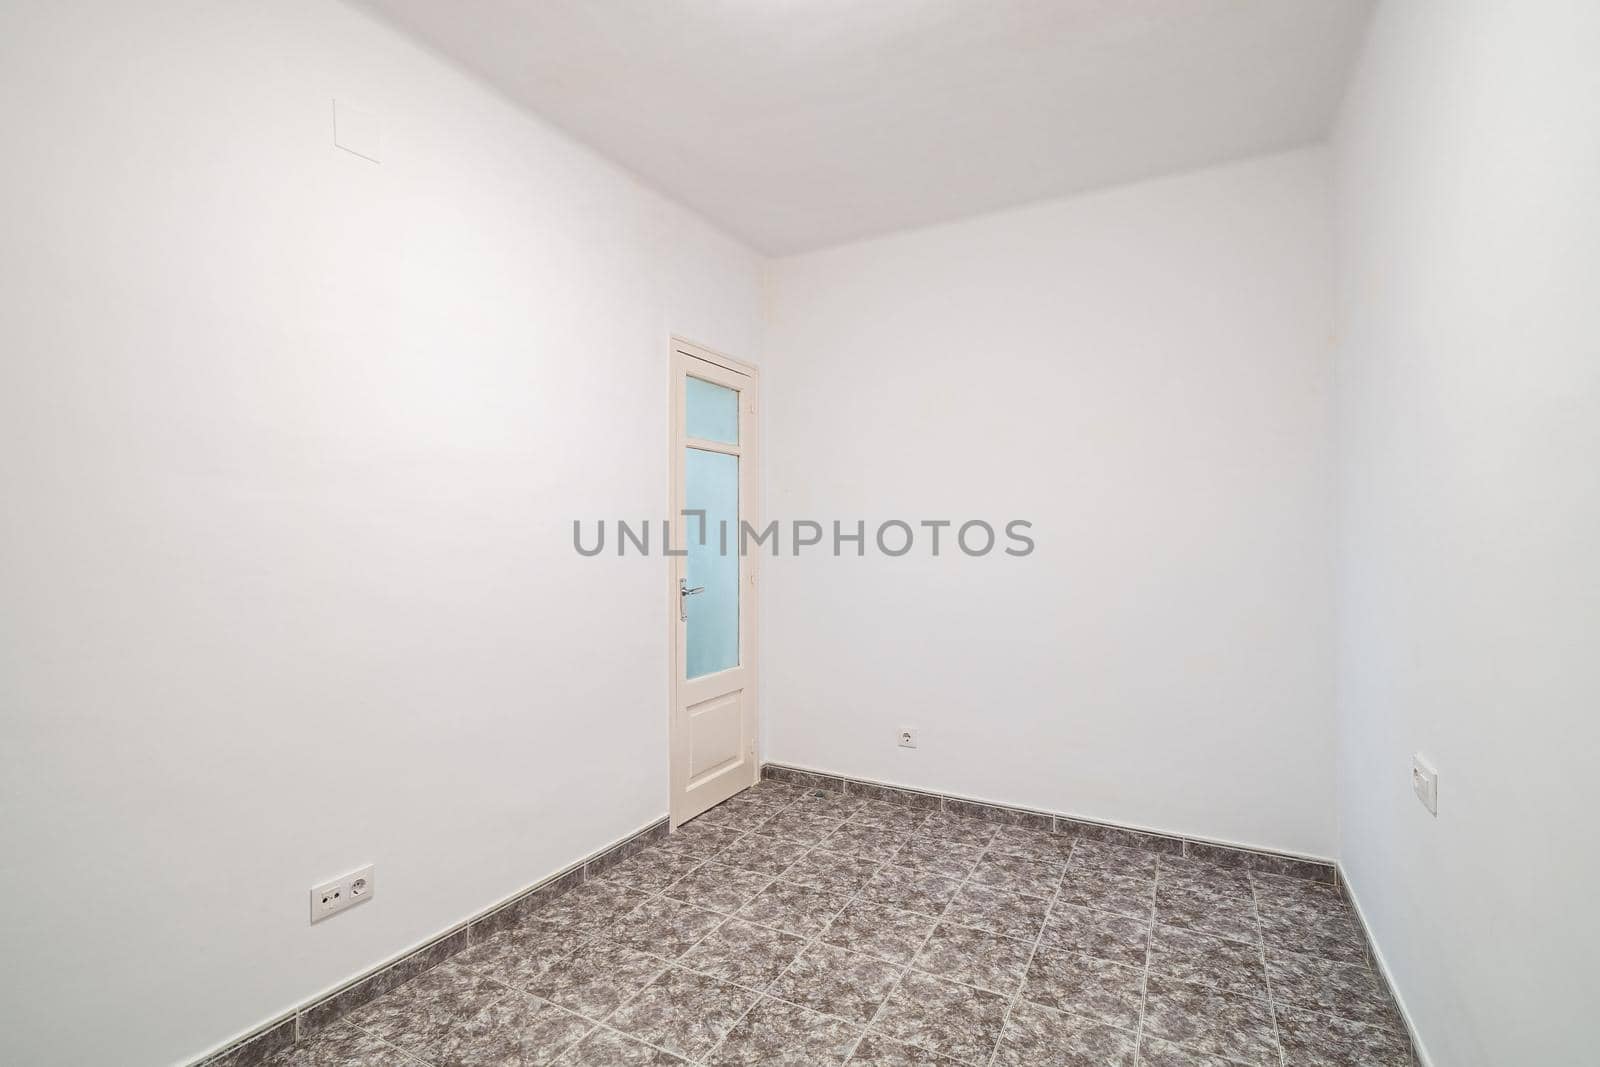 Room interior after renovation, unfurnished apartment with white walls, tiled floor and small door